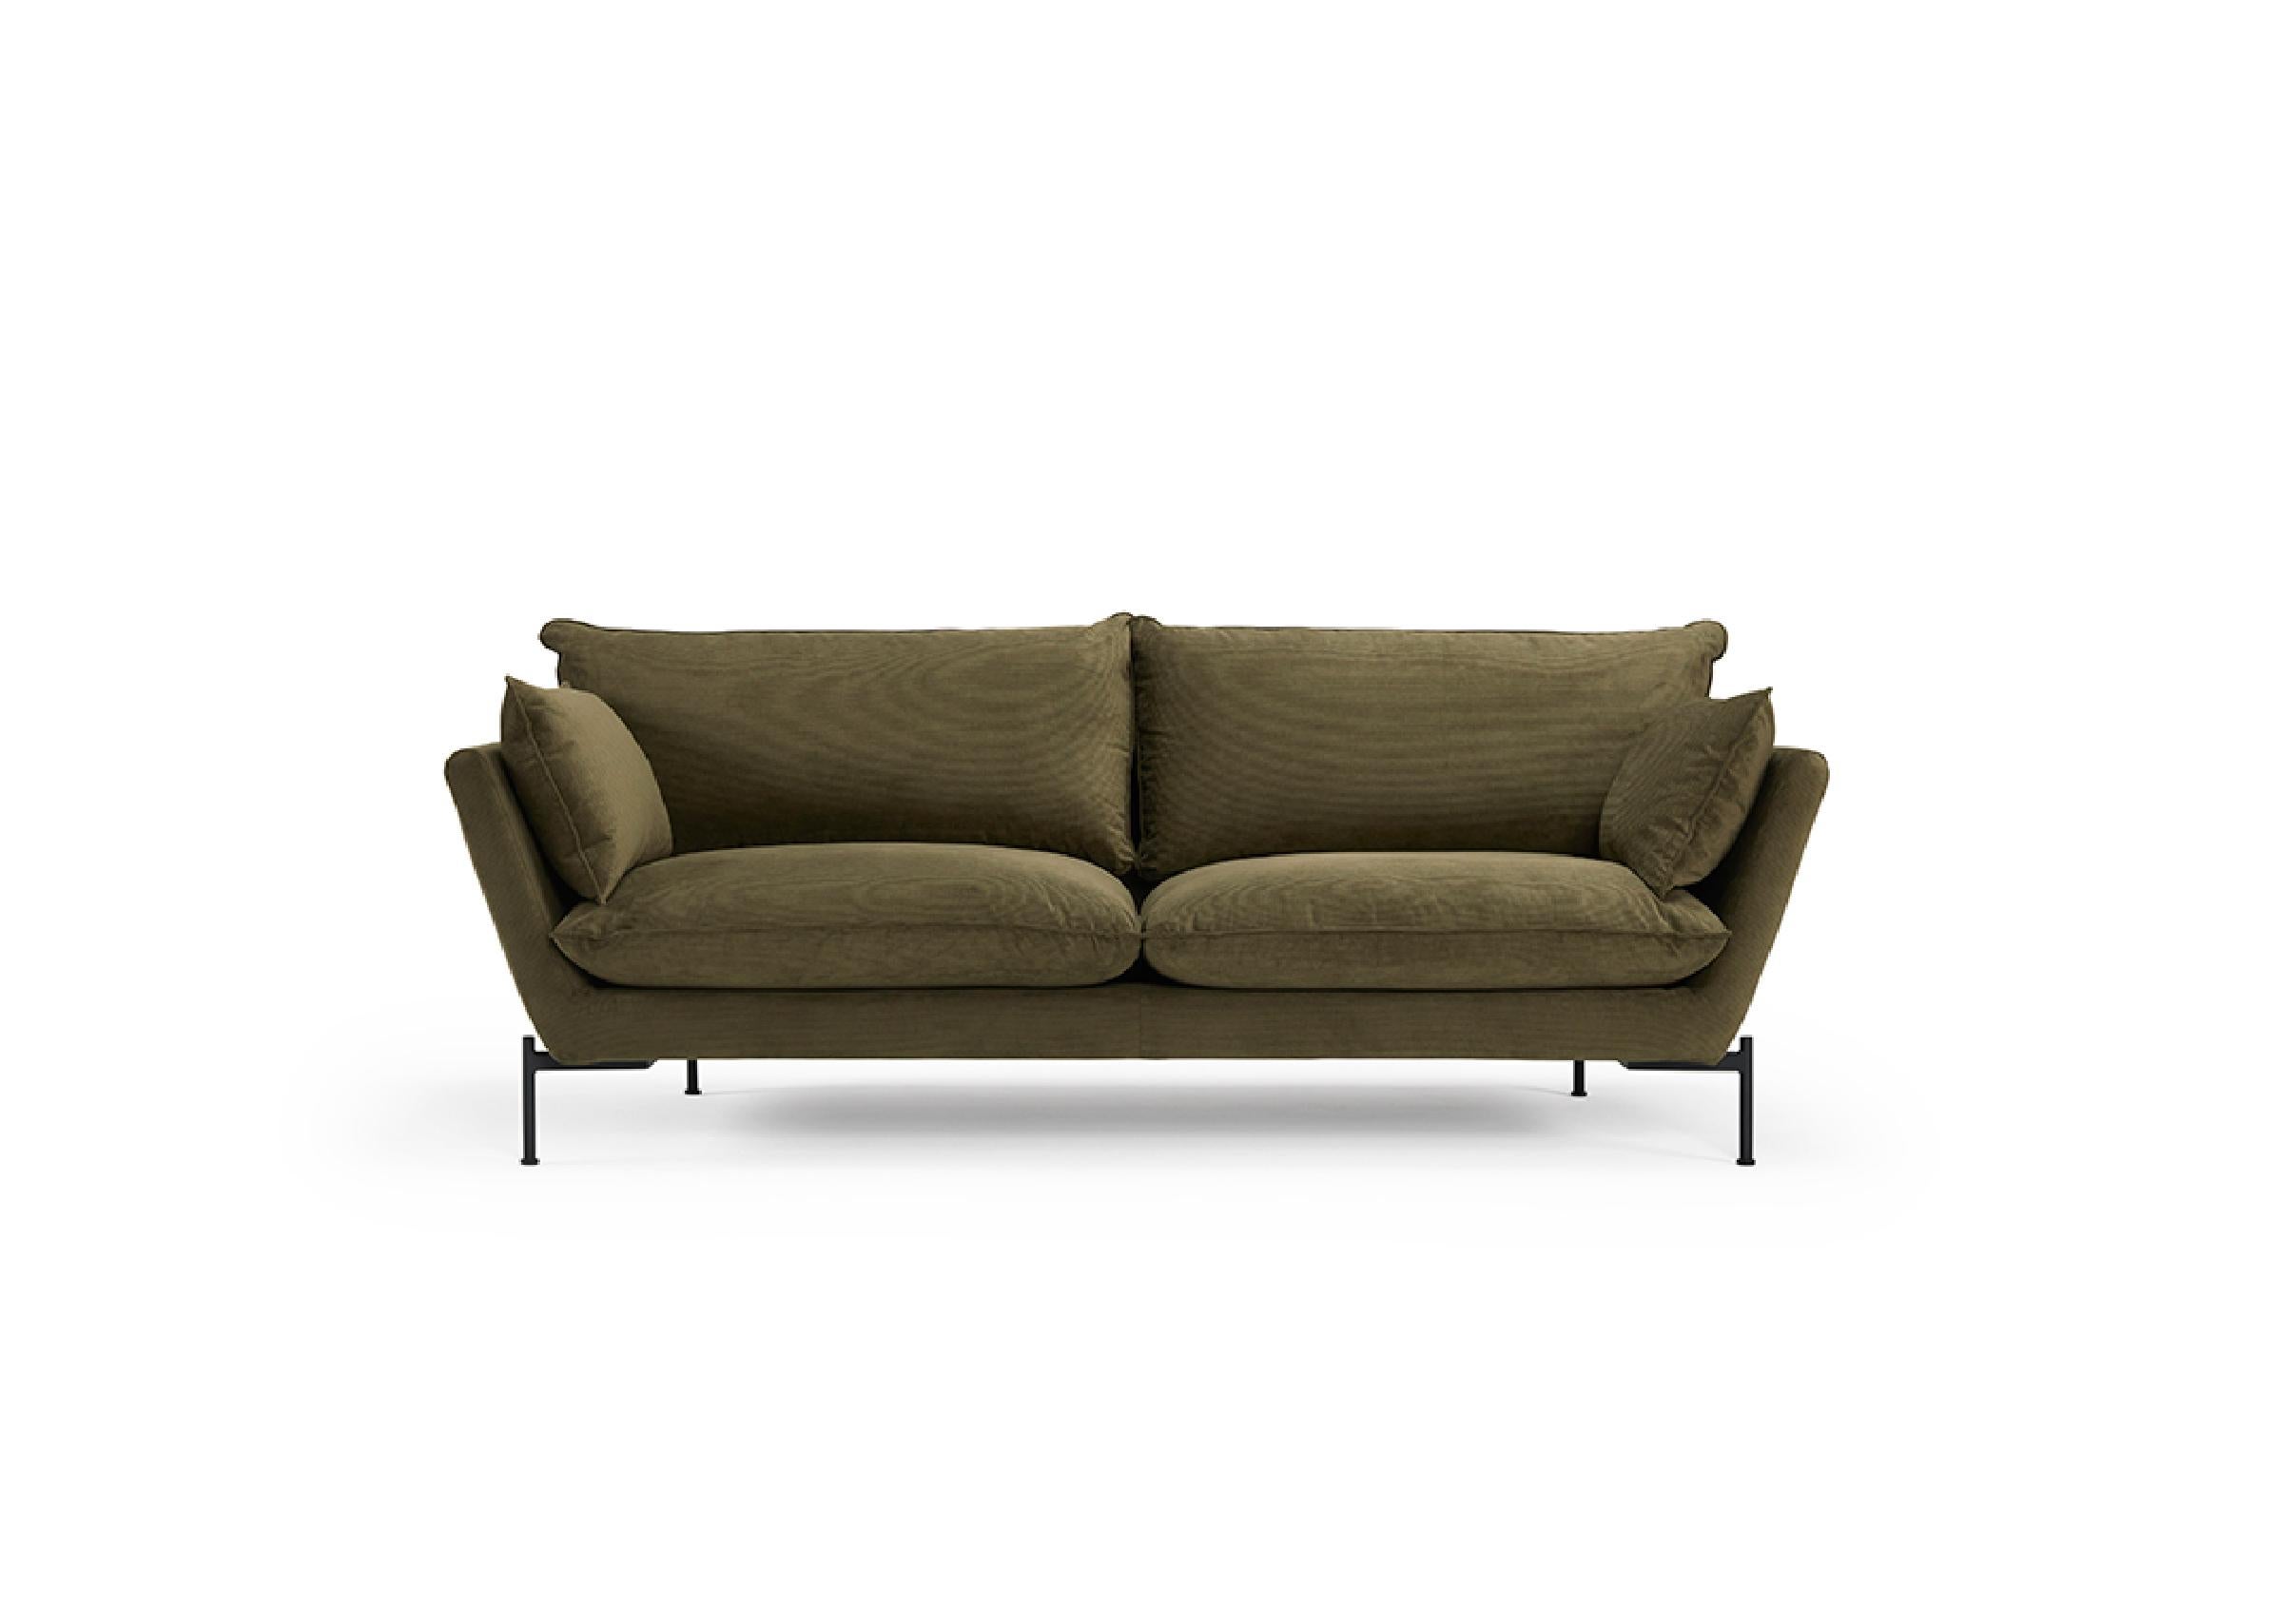 Modern Hayche Nave Lux 2 Seater Sofa - Green, UK, Made to Order For Sale